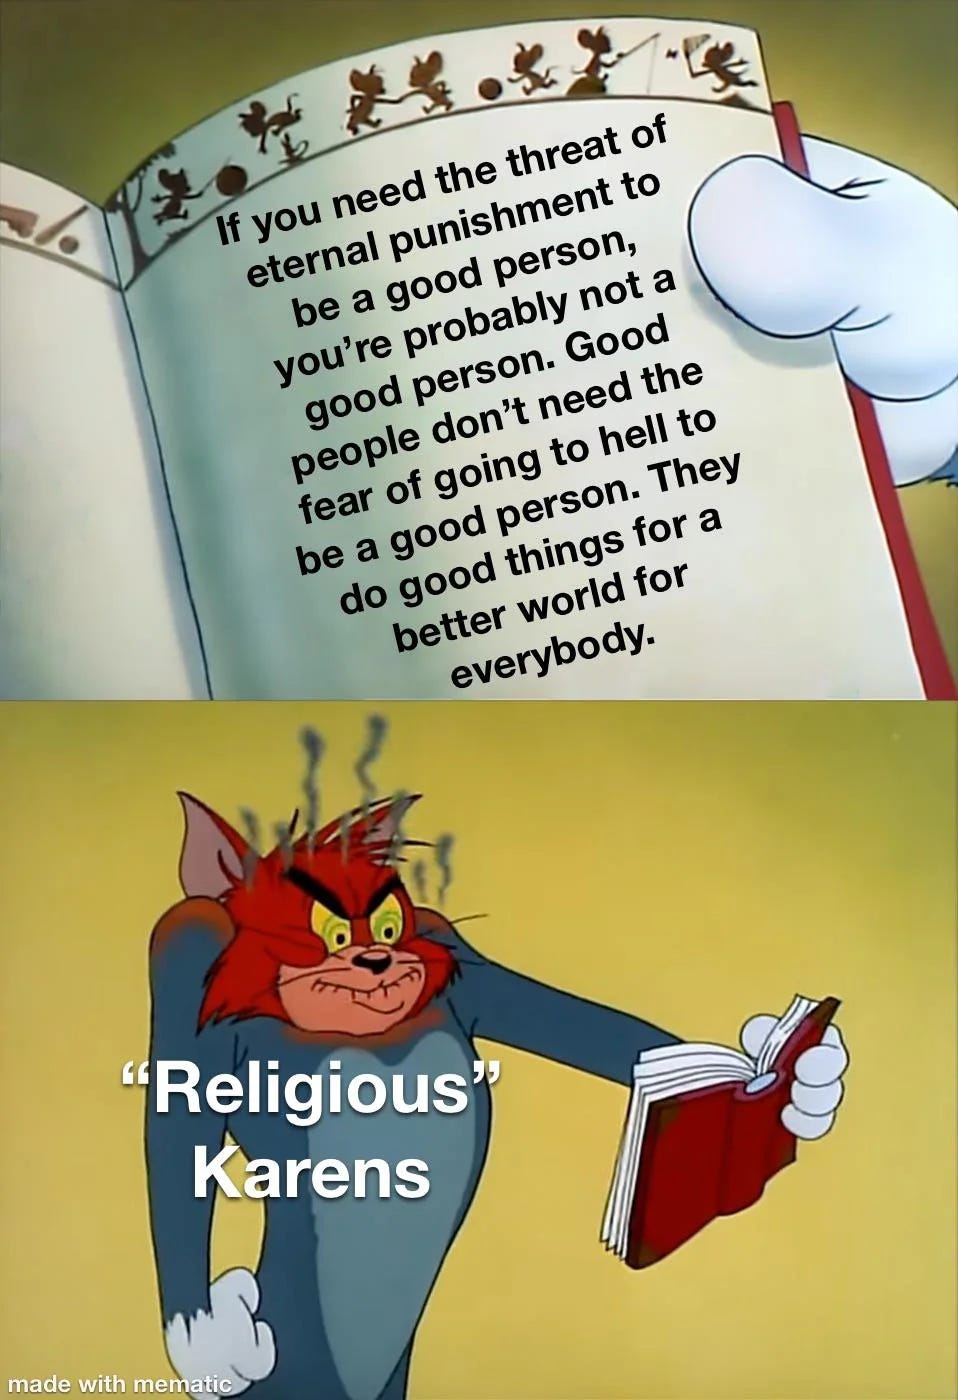 Top panel shows cartoon hand holding book, open to page that reads "if you need the threat of eternal punishment to be a good person, you're probably not a good person." Second panel shows angry cat holding book with red face labeled "religious Karens"